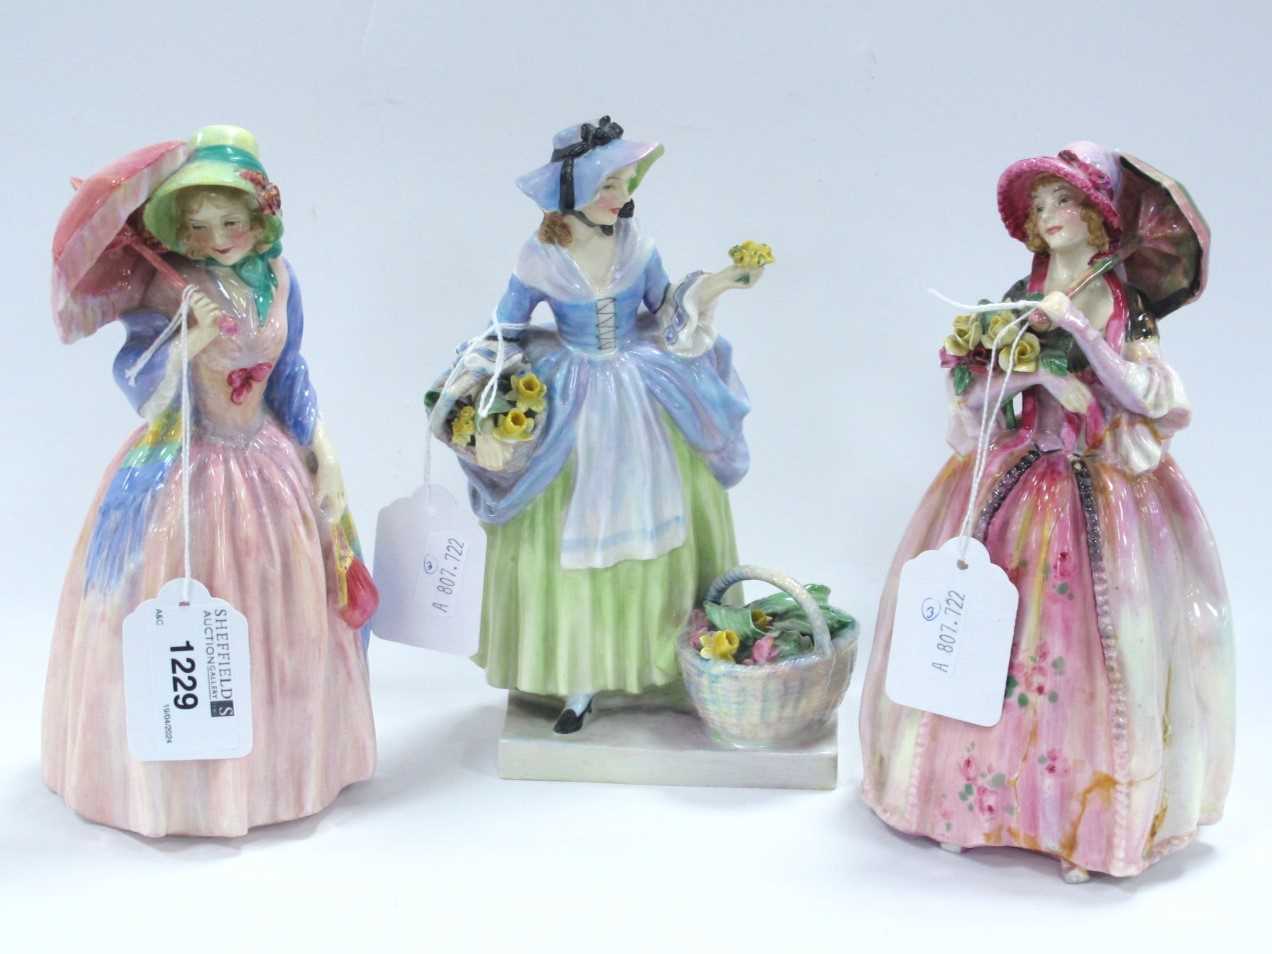 Royal Doulton Figurines 'Miss Demure', 'Spring Flowers' and June (body damaged). (3)